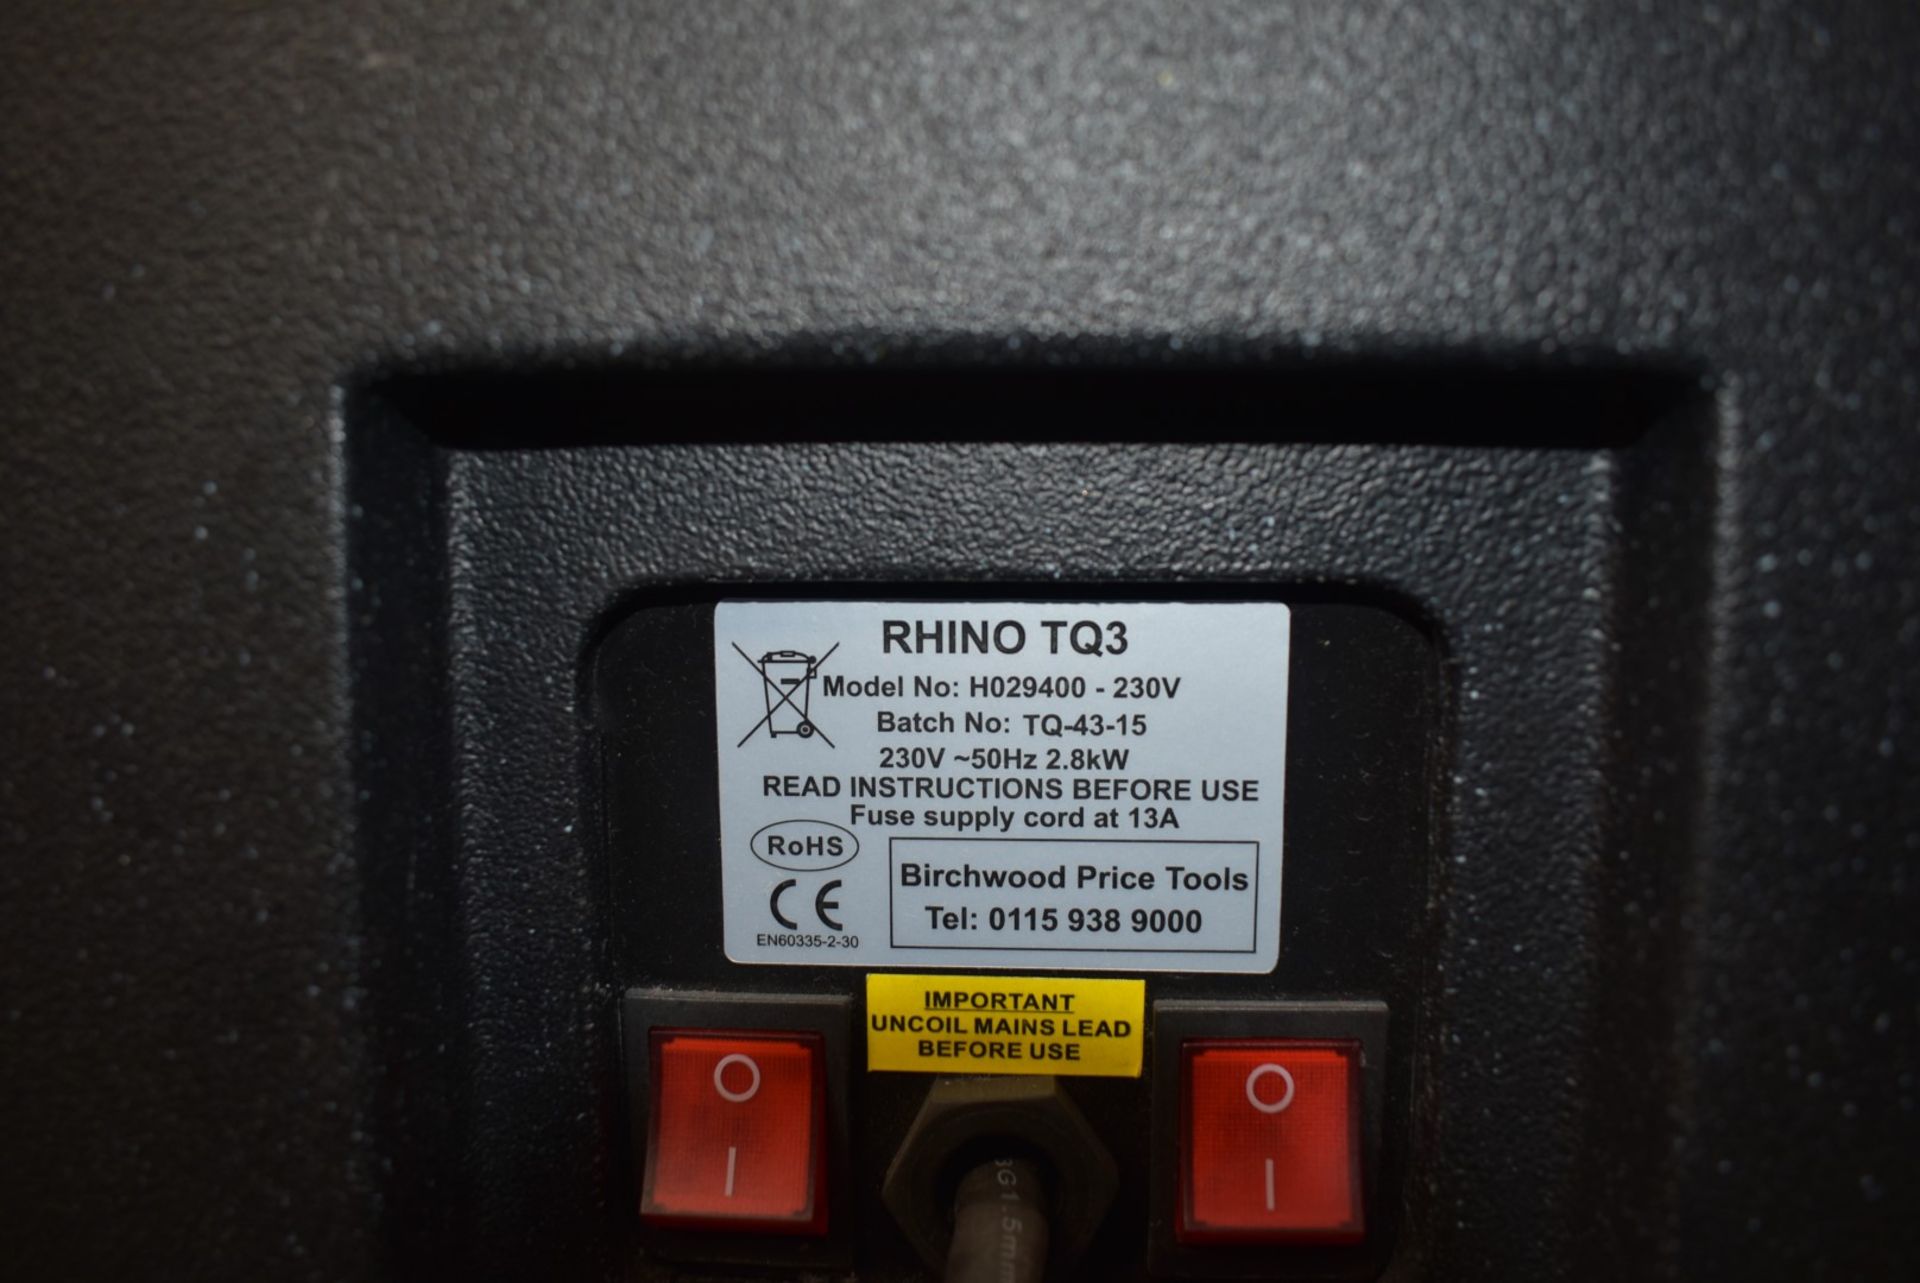 1 x RHINO TQ3 Industrial Infrared Heater 2.8kW 230V - Original RRP £199.00 - Ref: DS7571 ALT - CL011 - Image 2 of 4